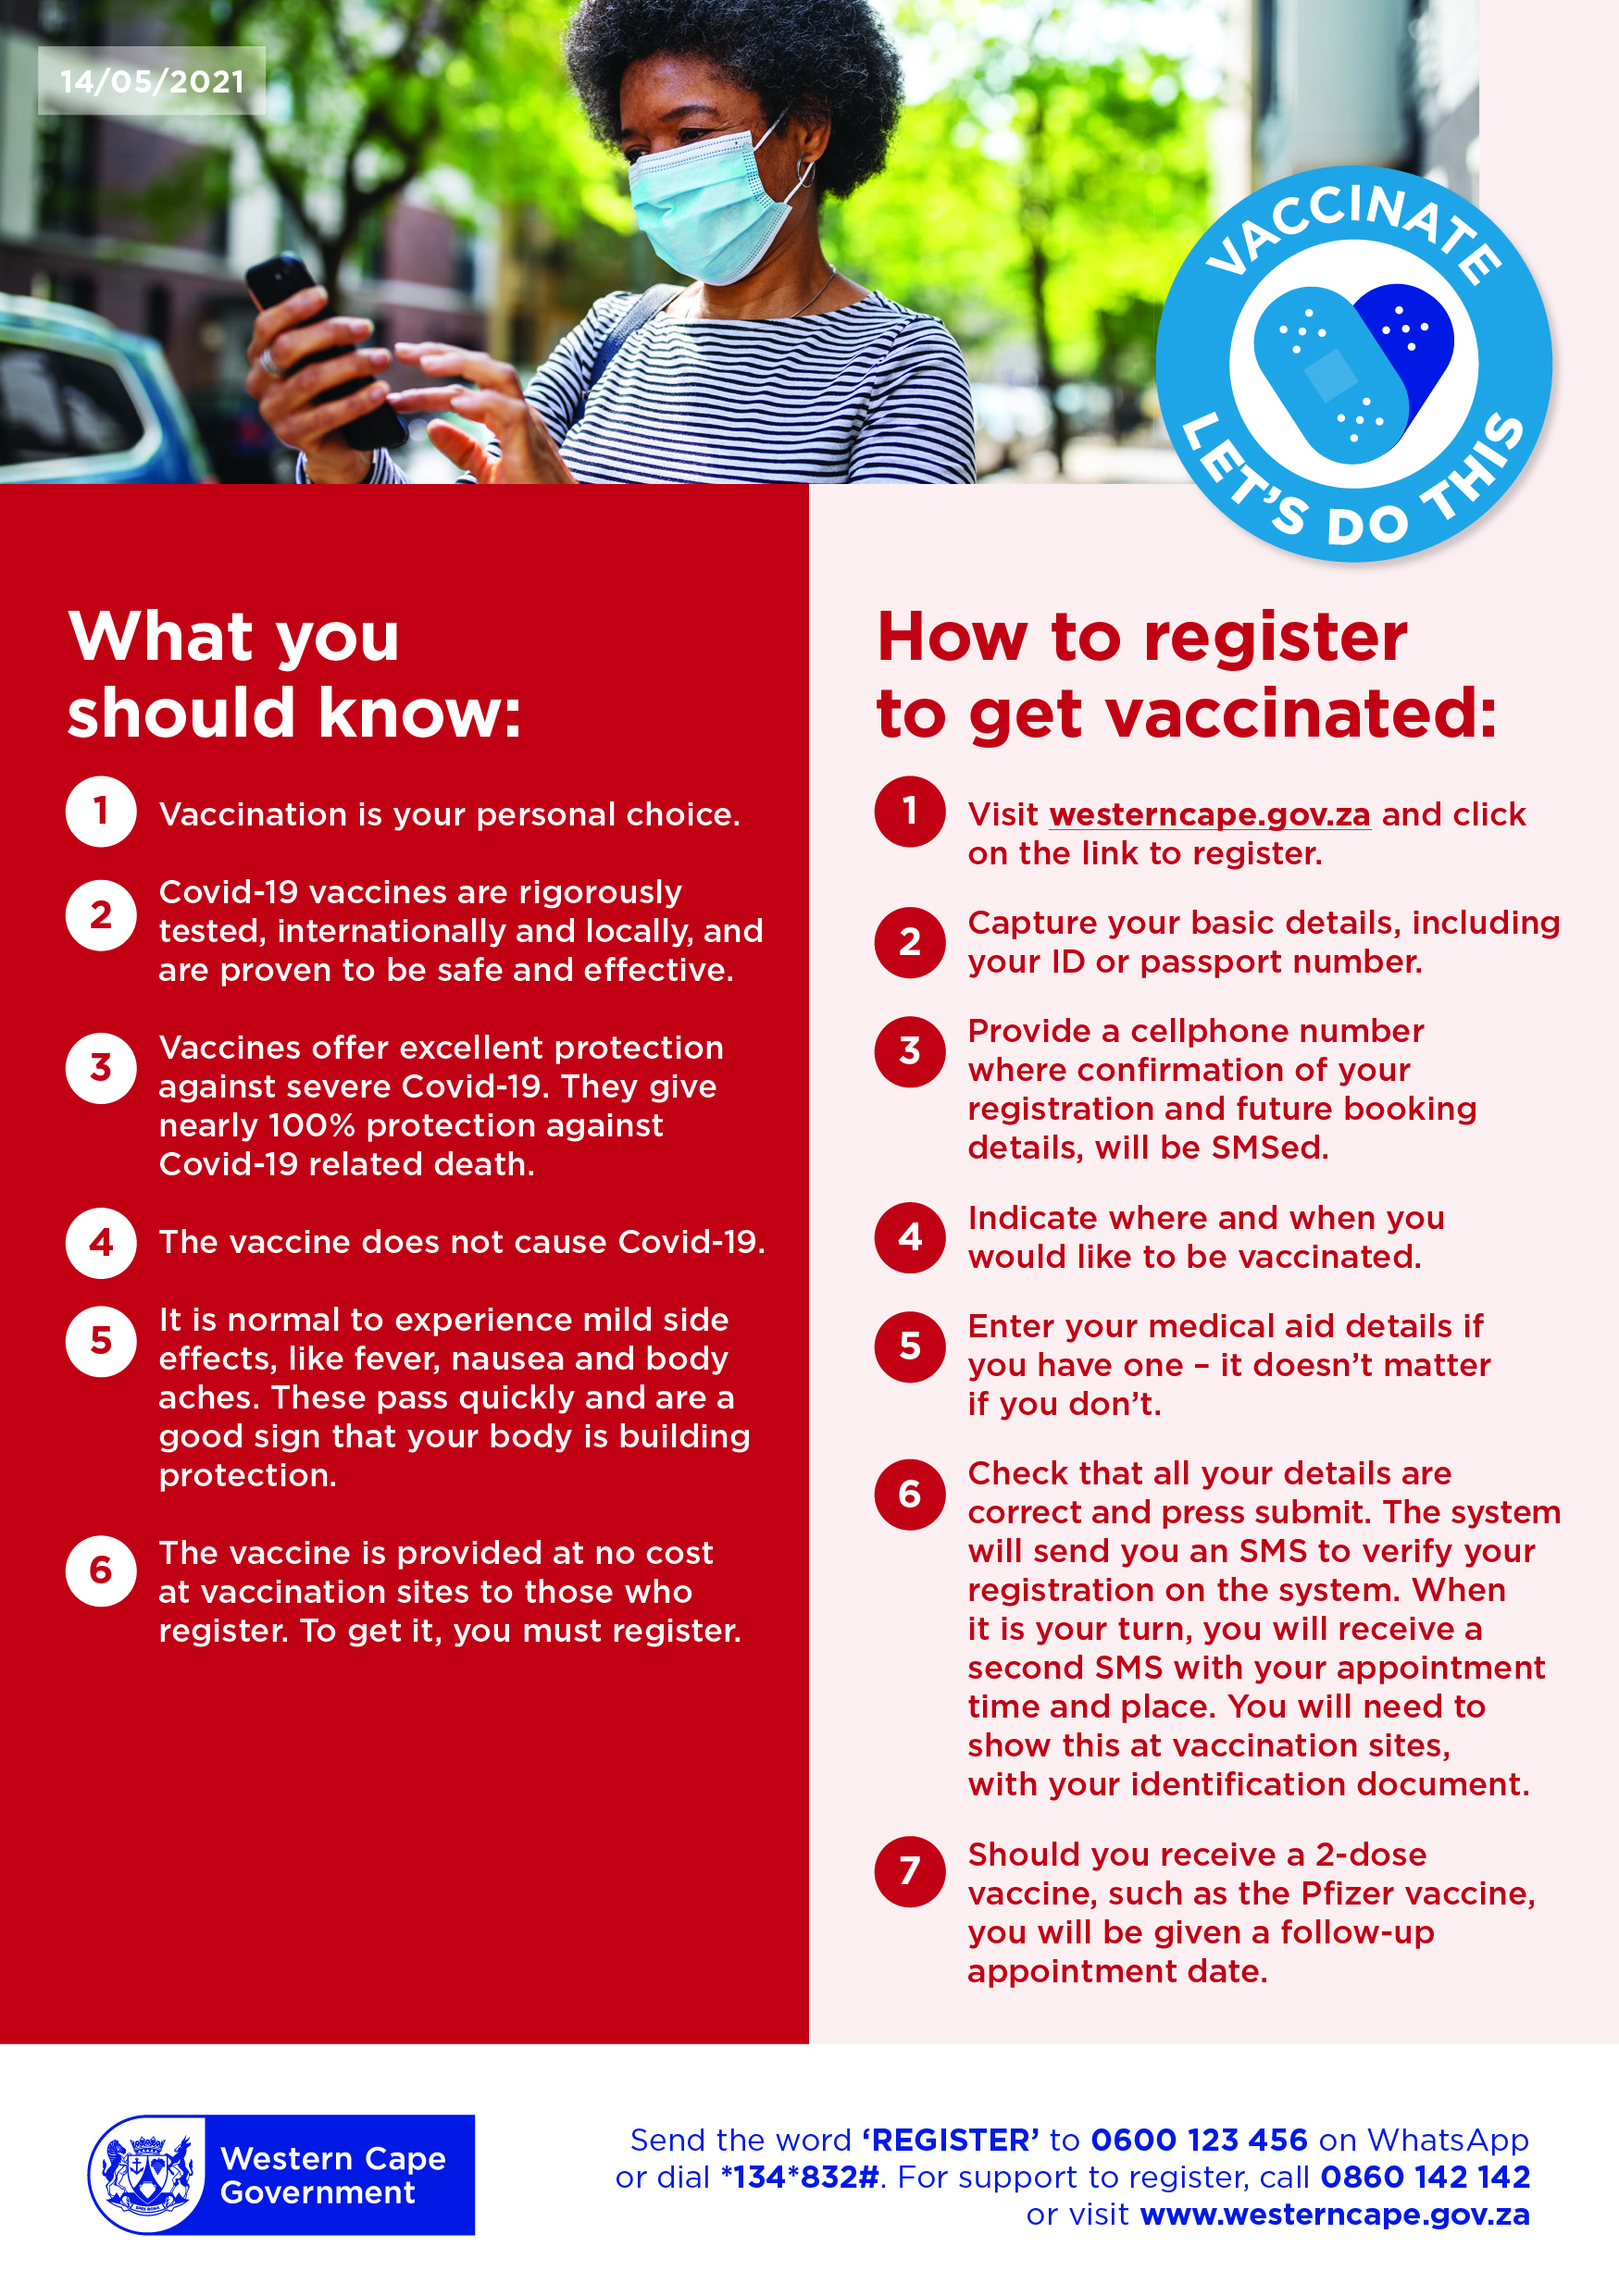 How to register to get vaccinated